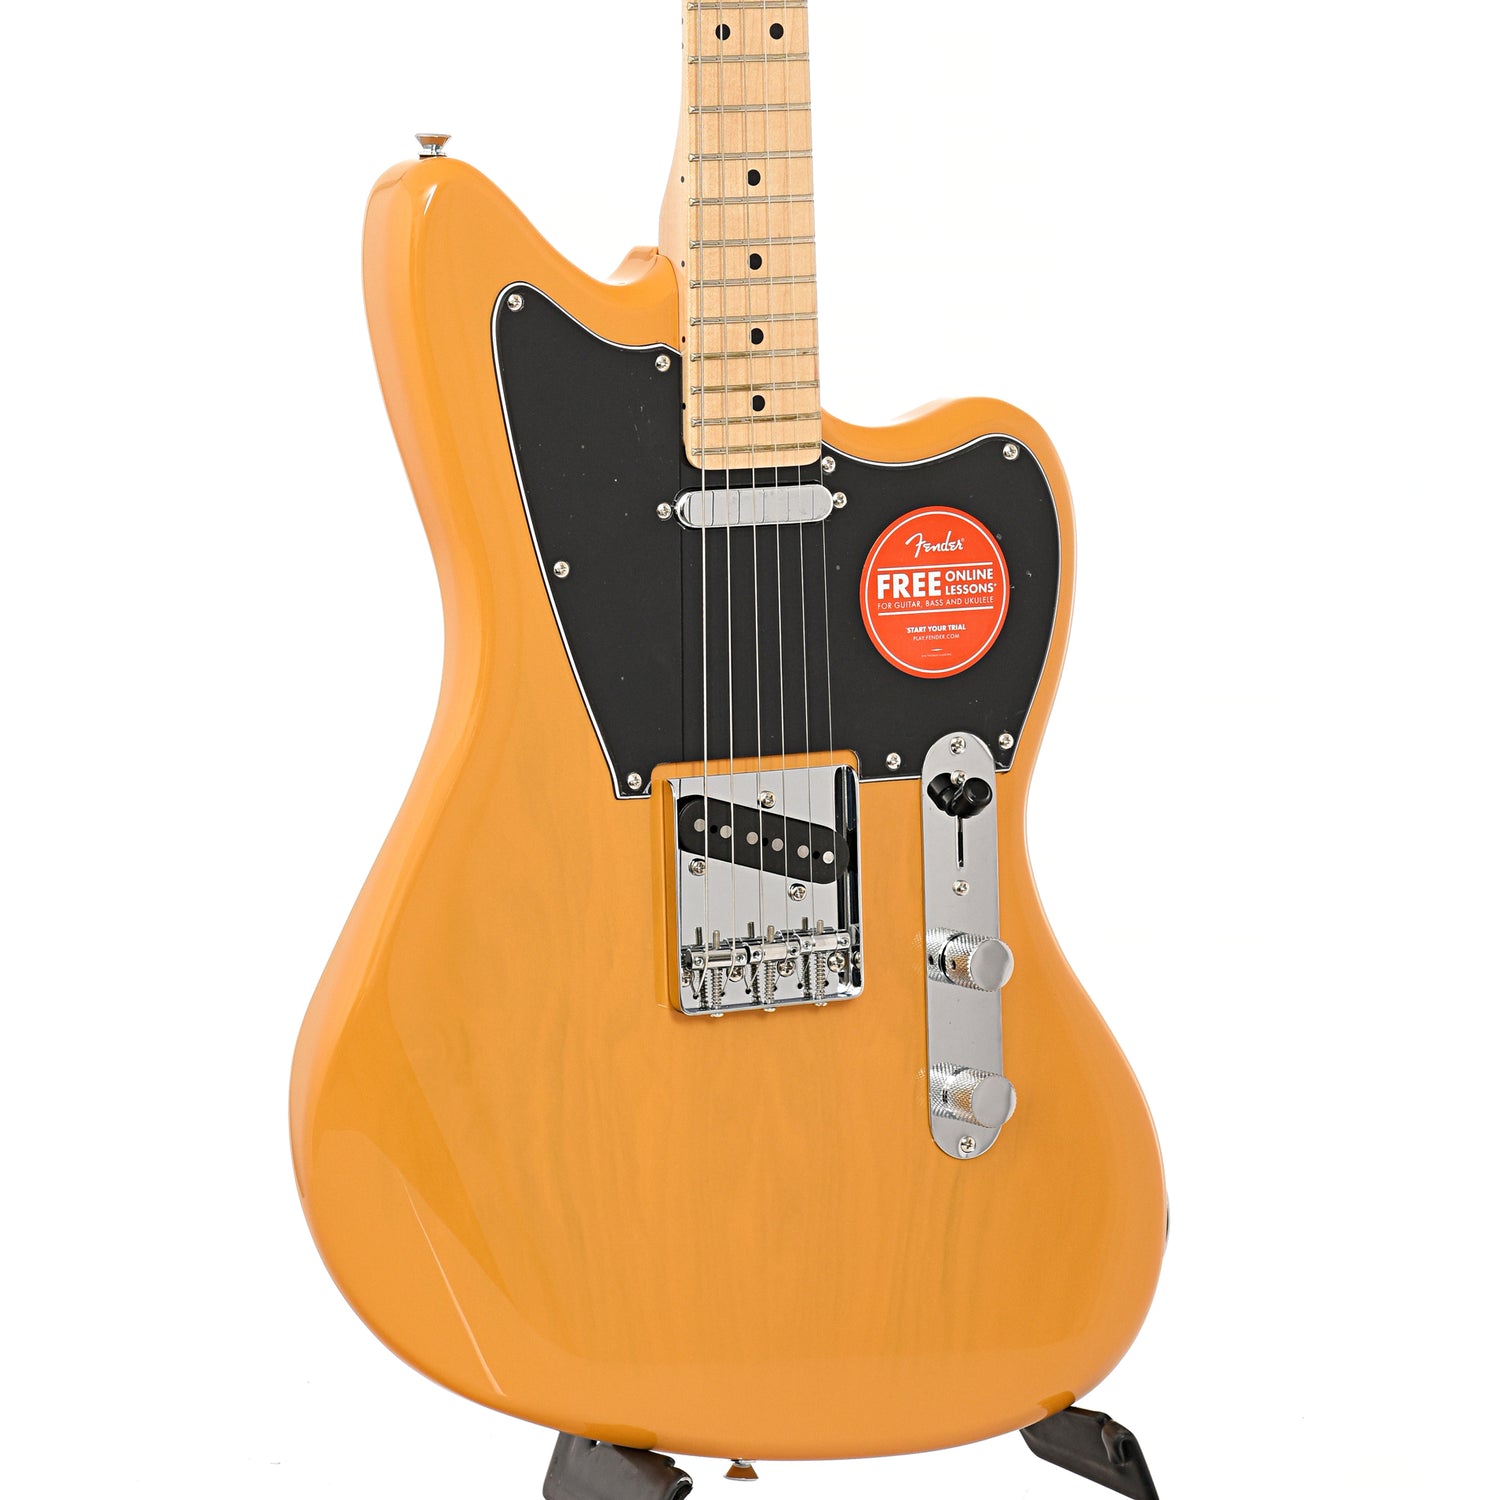 Image 3 of Squier Paranormal Offset Telecaster, Butterscotch Blonde - SKU# SPOT-BB : Product Type Solid Body Electric Guitars : Elderly Instruments